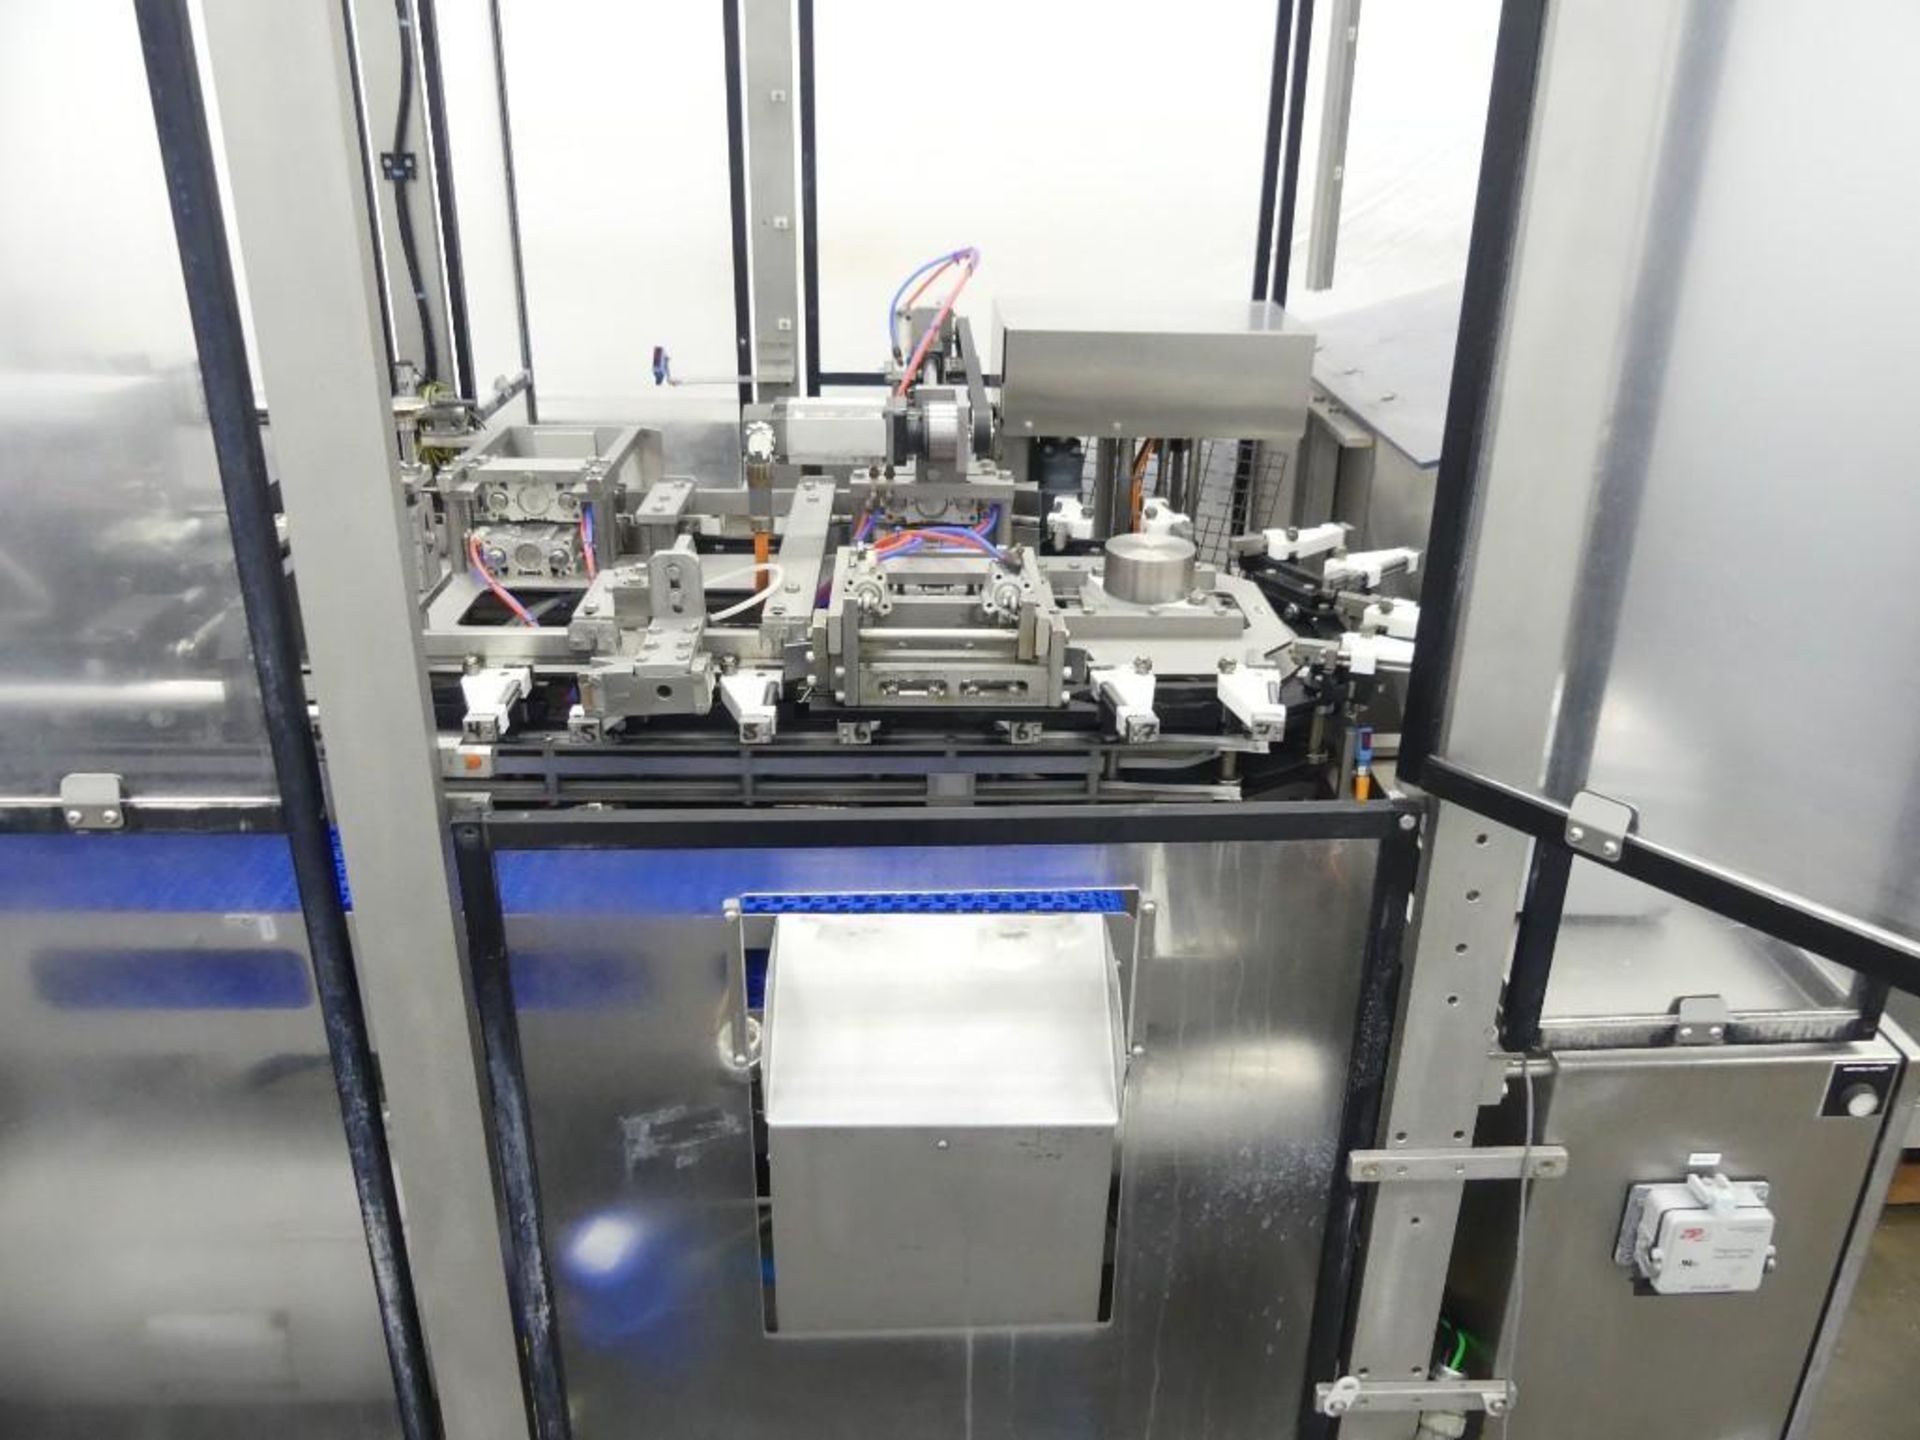 Massman HFFS-IM1000 Flexible Pouch Packaging System - Image 44 of 127